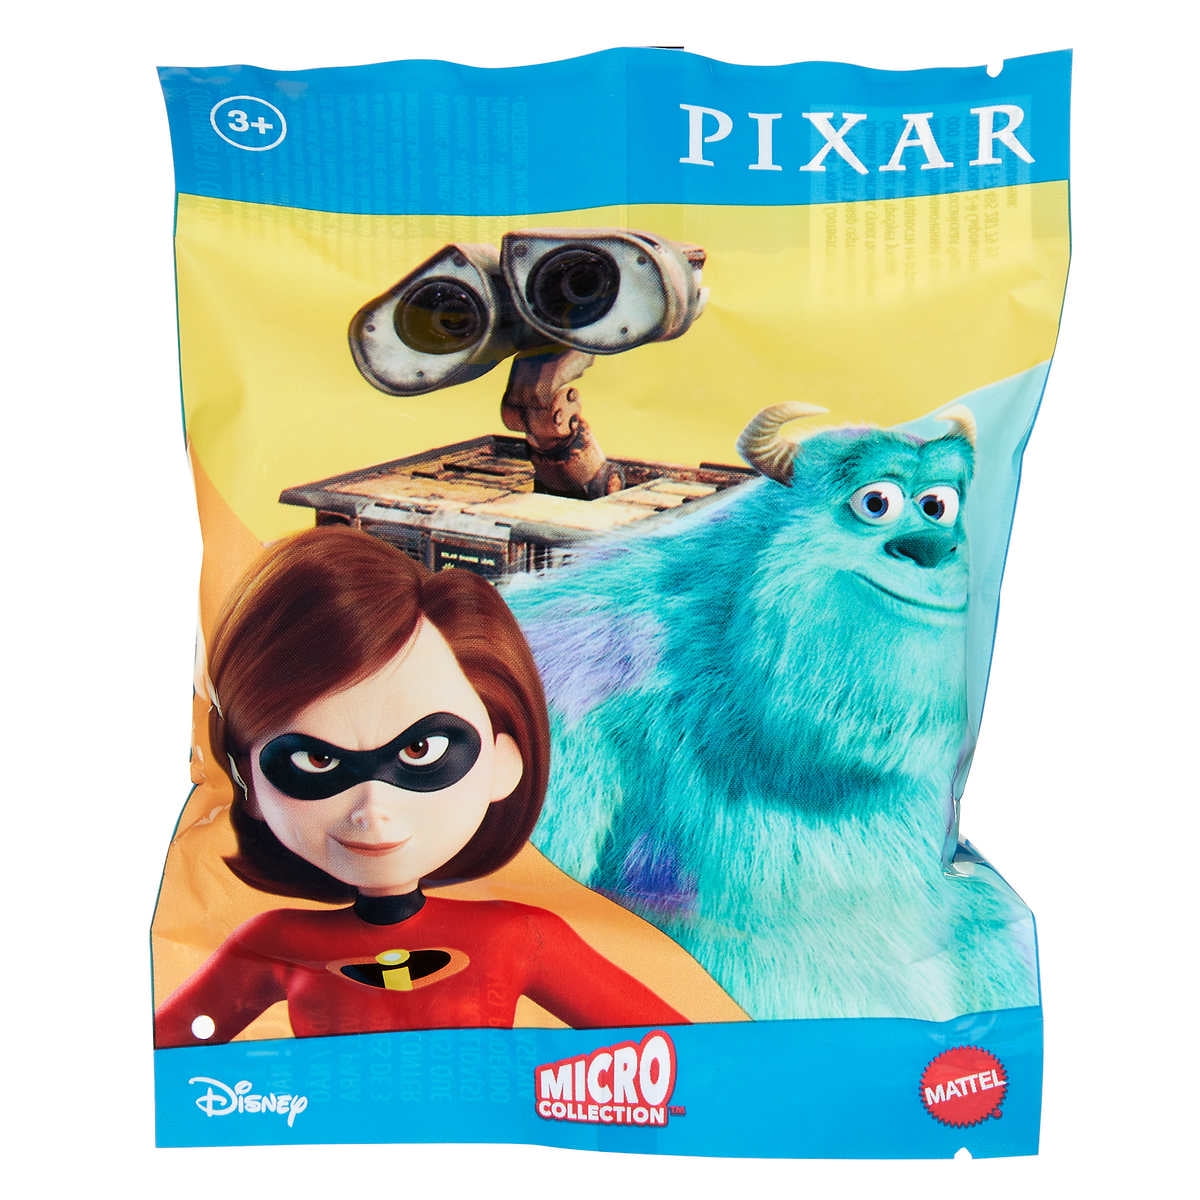 Disney Pixar 35 Mystery Bags 3 Micro Collection in Bag for sale online 